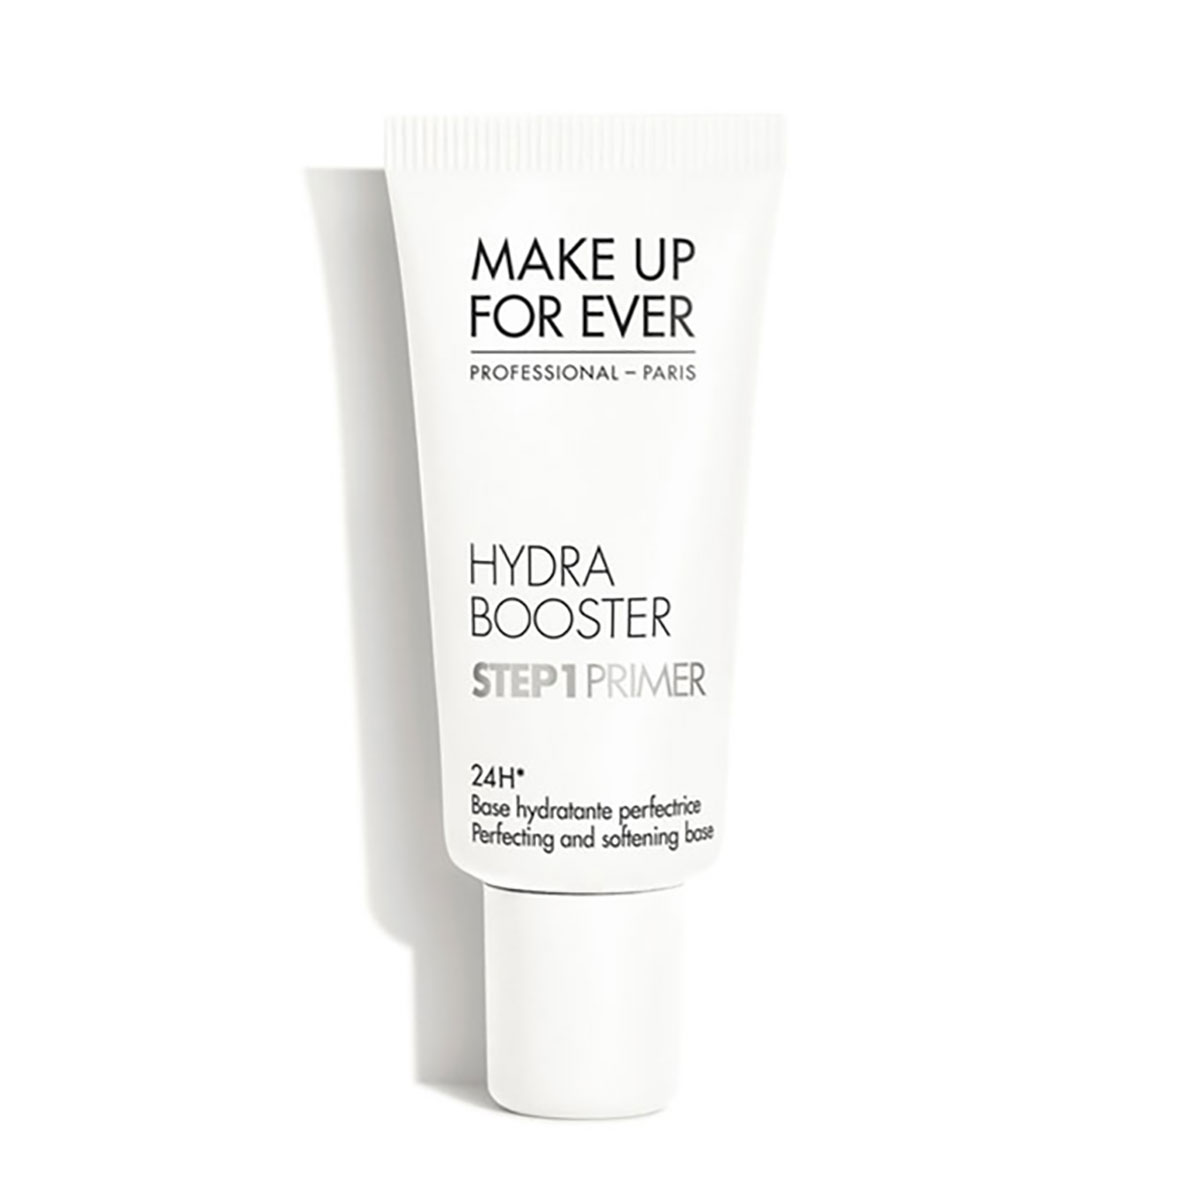 Make Up For Ever Hydra Booster Step 1 Primer - Perfecting And Softening Base 15 Ml